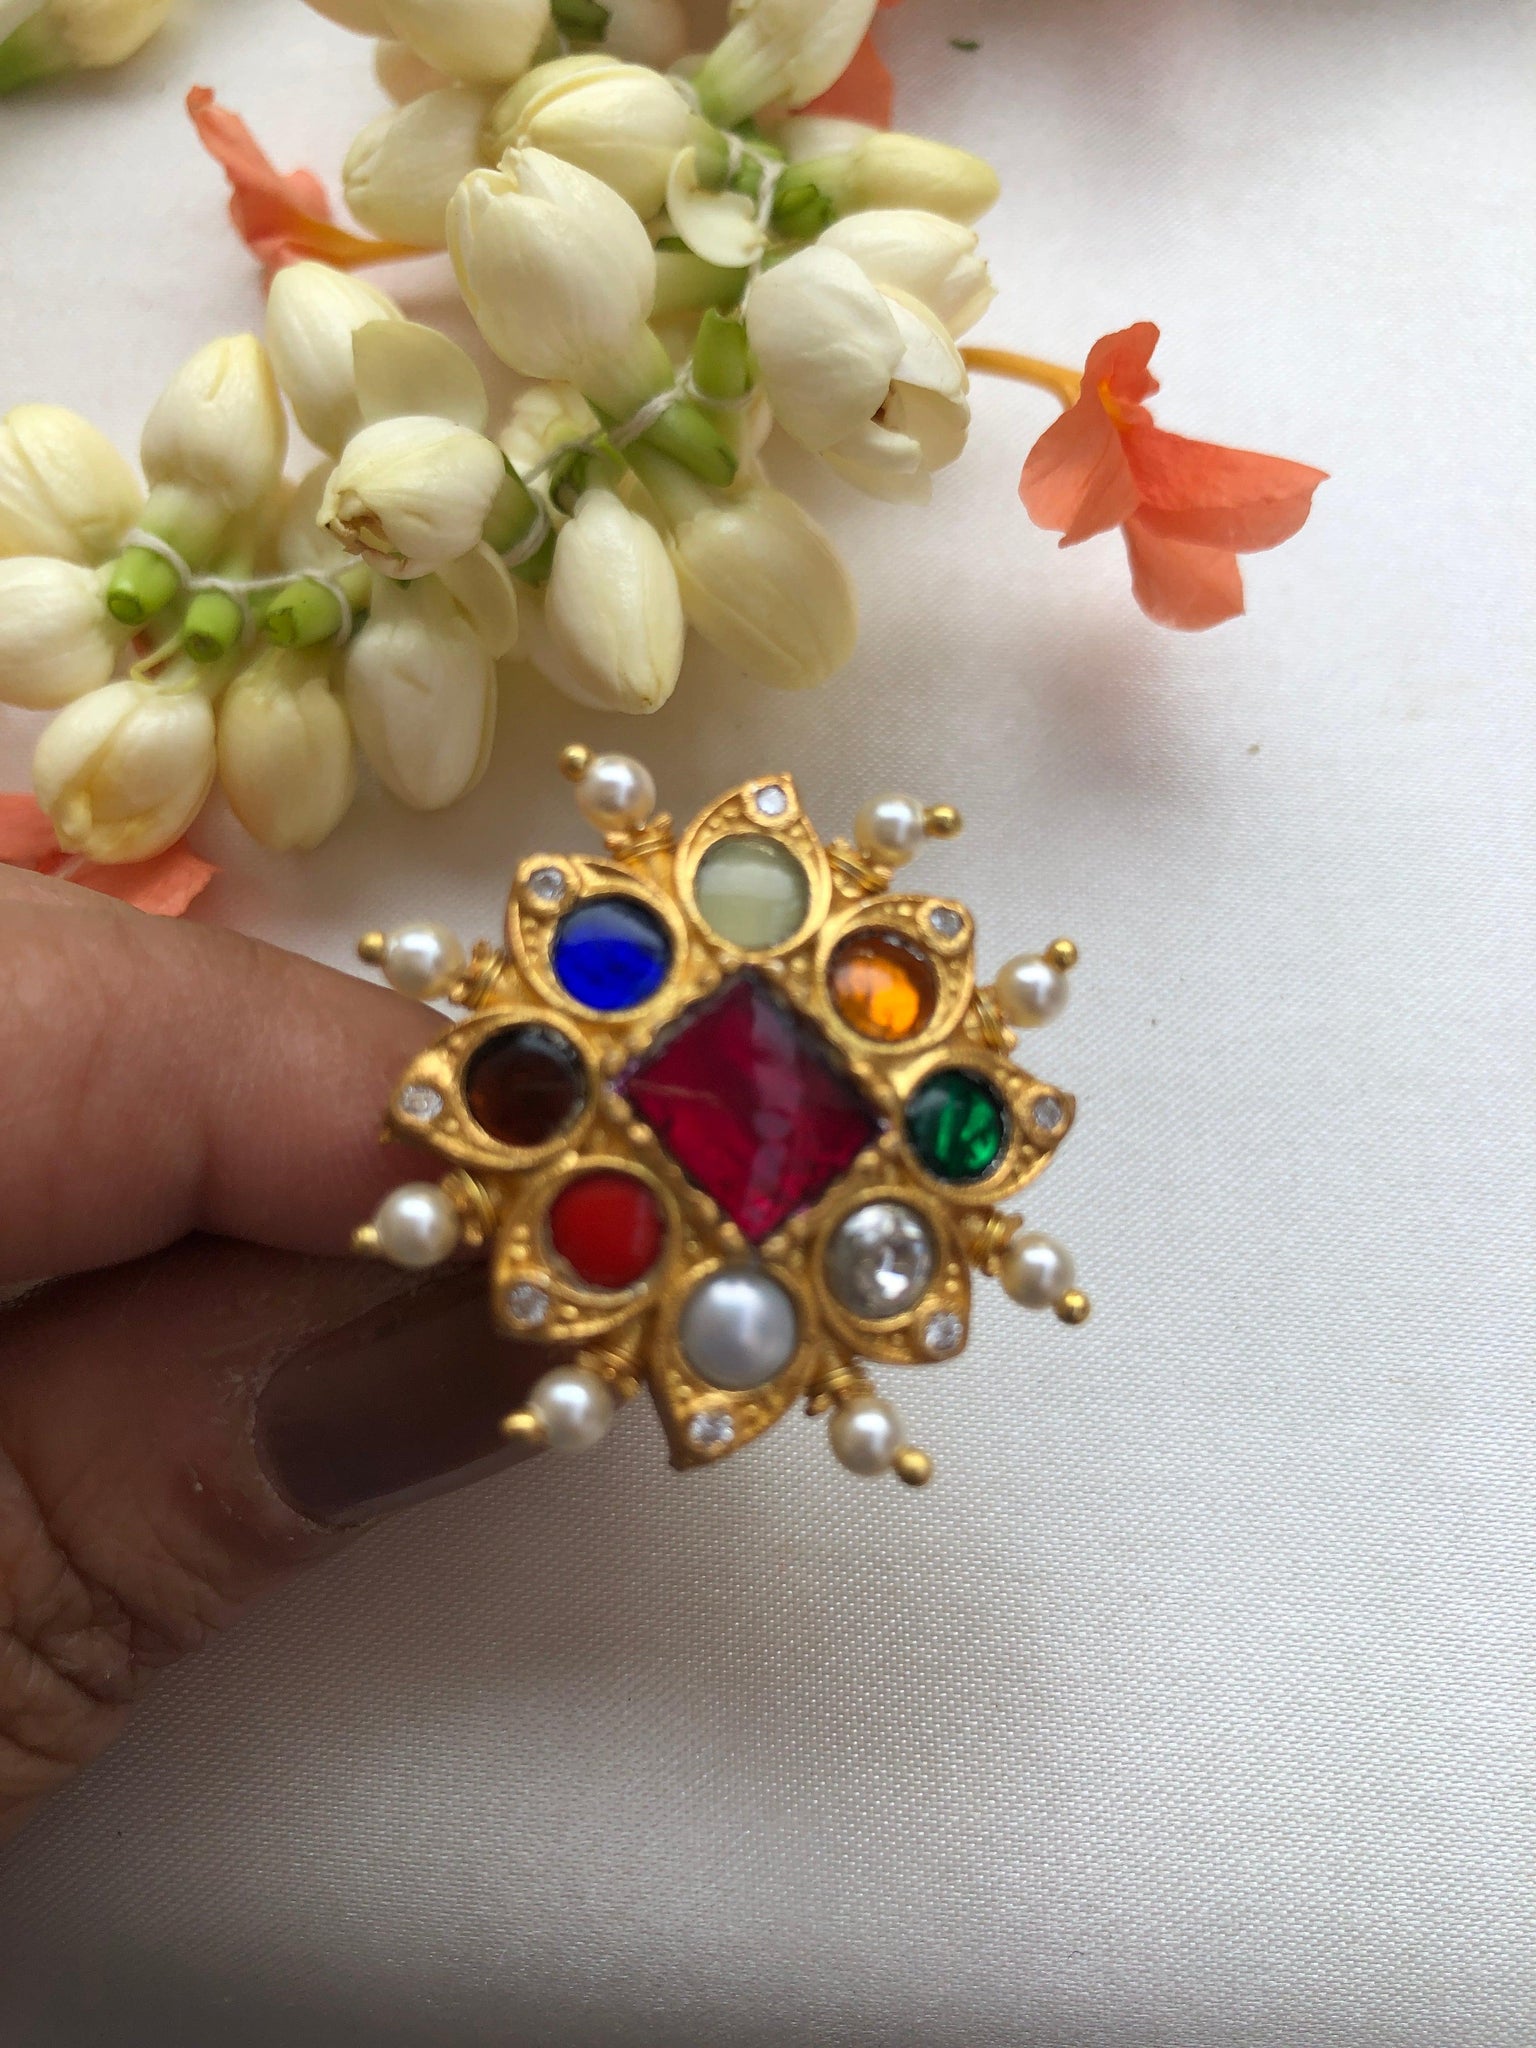 Aakriti Square Ruby Ring - Buy Finest Indian Imitation Fashion Jewellery At  Best Price.